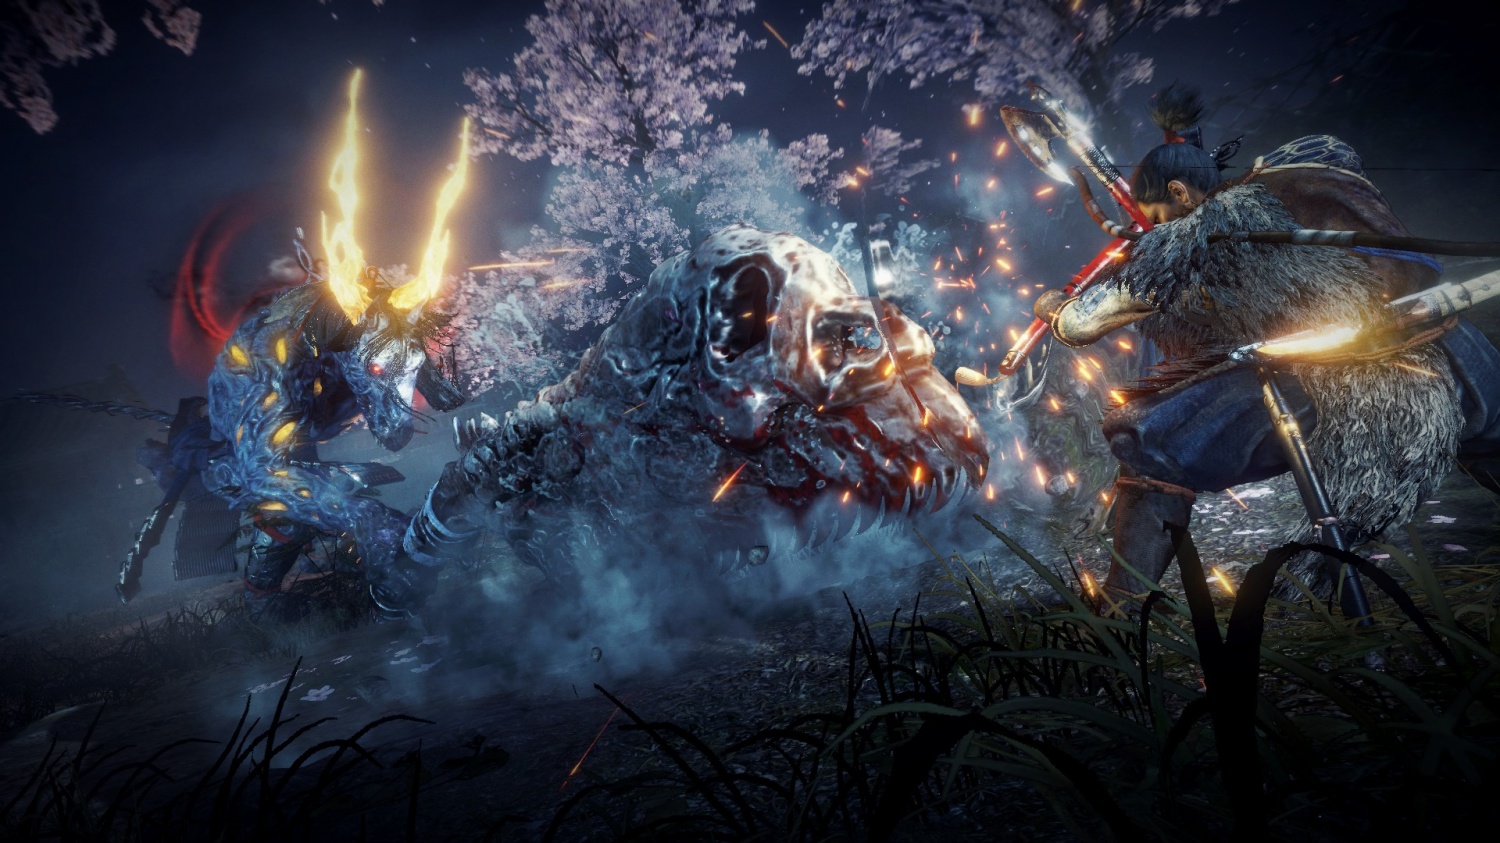 Team Ninja Rolls Out Patch 1.05; What's New With Nioh 2?